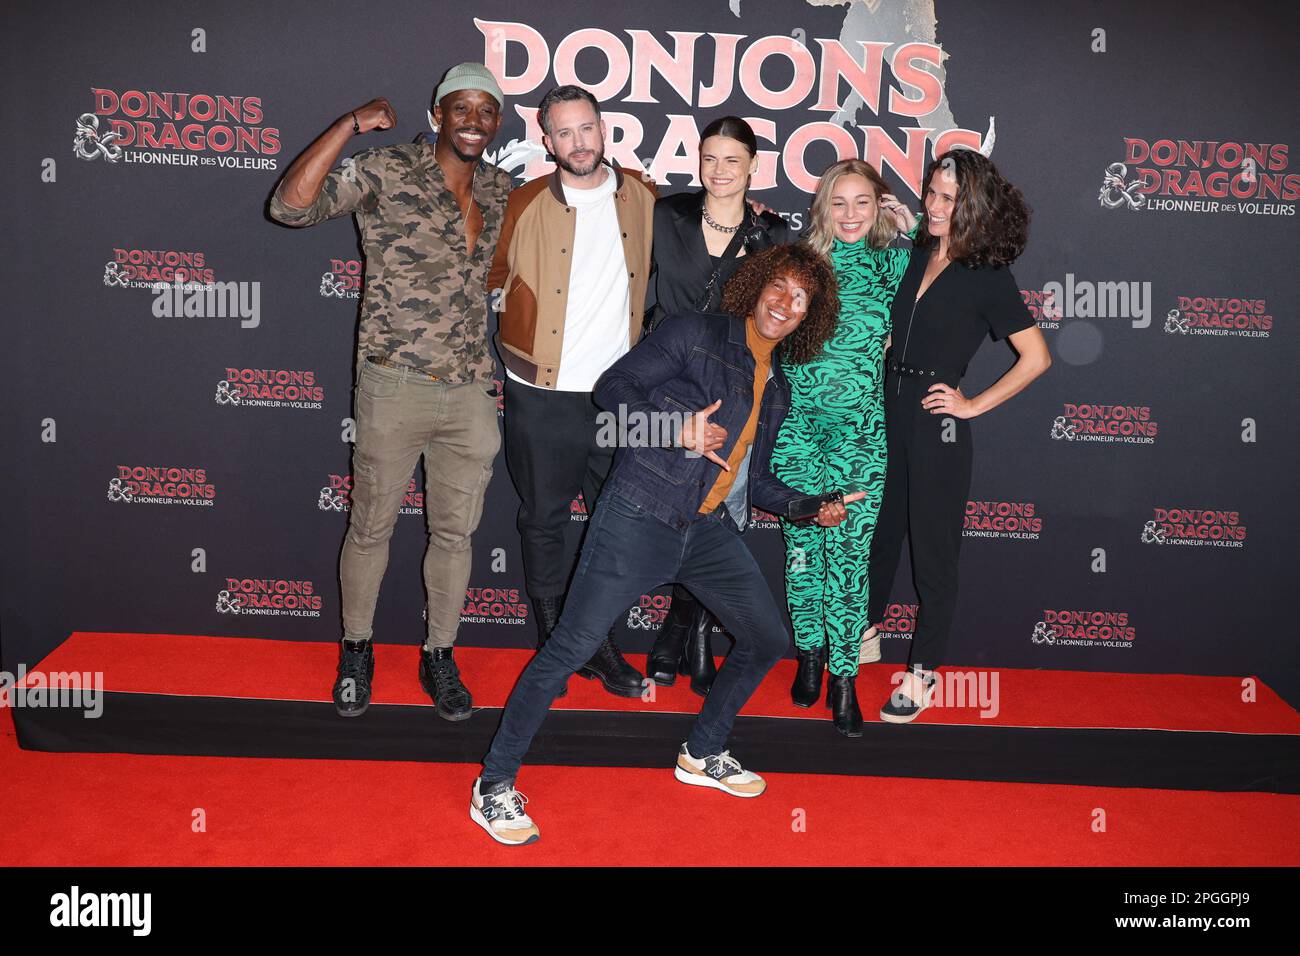 Paris, France. 22nd March, 2023. Olga Khokhlova, Cyril, Moussa, Cindy Poumeyrol, Clémence Castel and Laurent Maistret attends Dungeons & Dragons Premiere held at Grand Rex on March 22, 2023 in Paris, France. Photo by Jerome Dominé/ABACAPRESS.COM Credit: Abaca Press/Alamy Live News Stock Photo